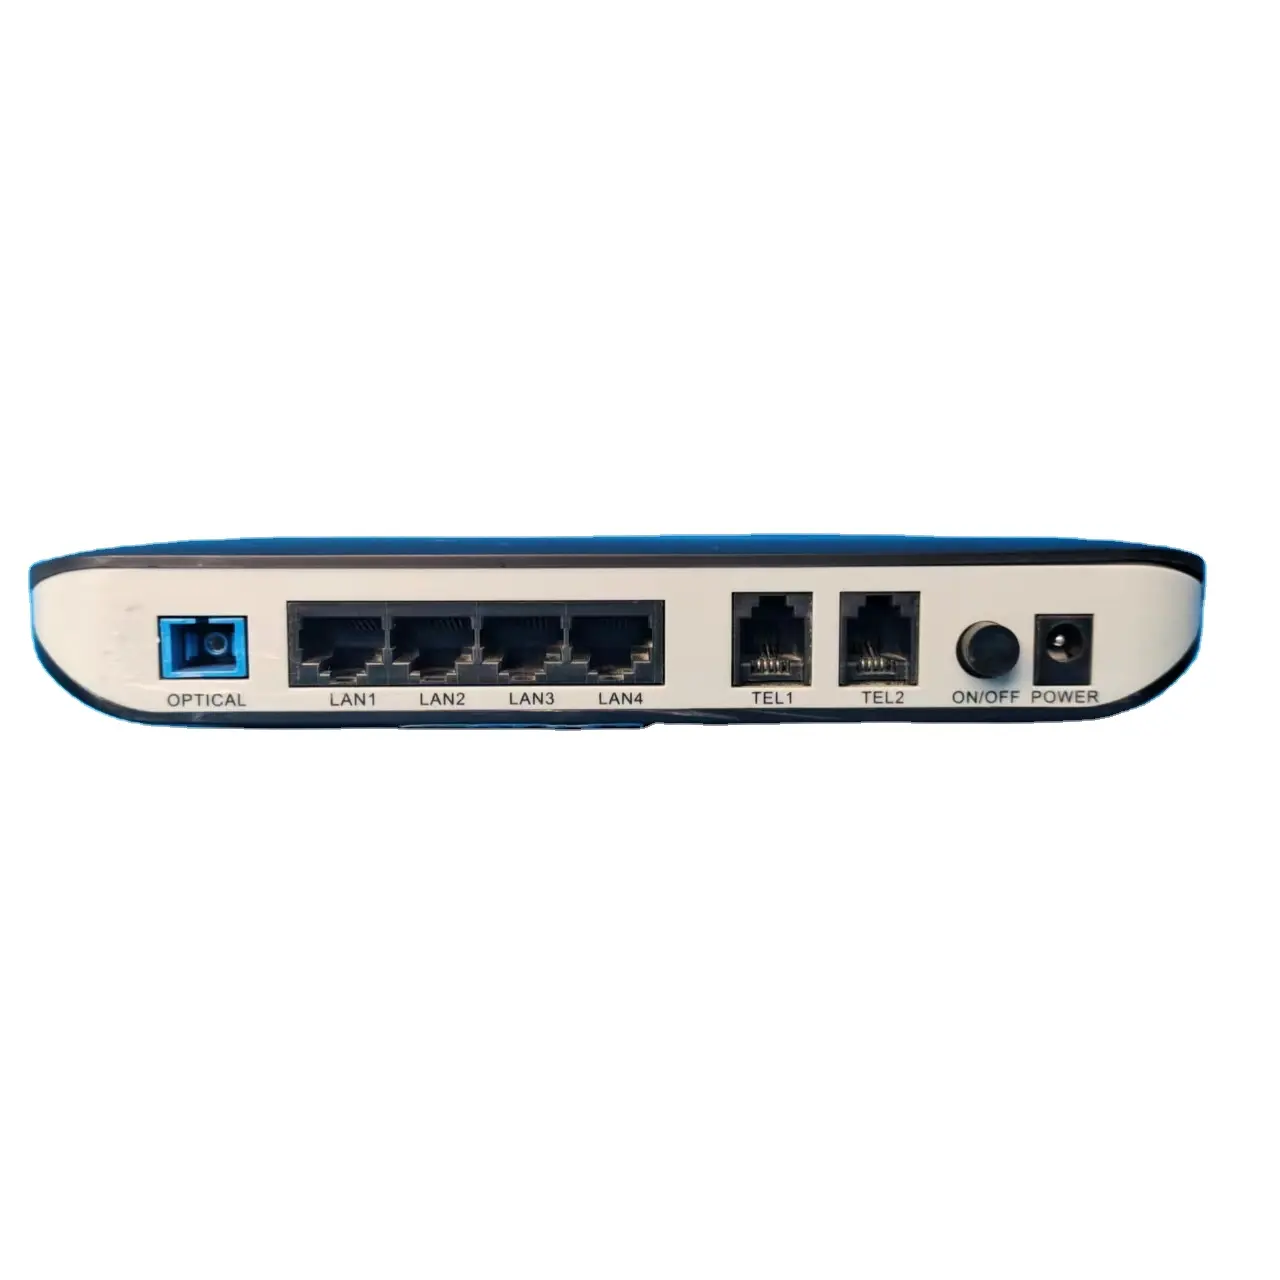 Cheaper Fiber Optic Equipment Huawei HG8240 GPON Good Condition Used ONU ONT with 4FE+2POTS Optical Network Unit for Huawei